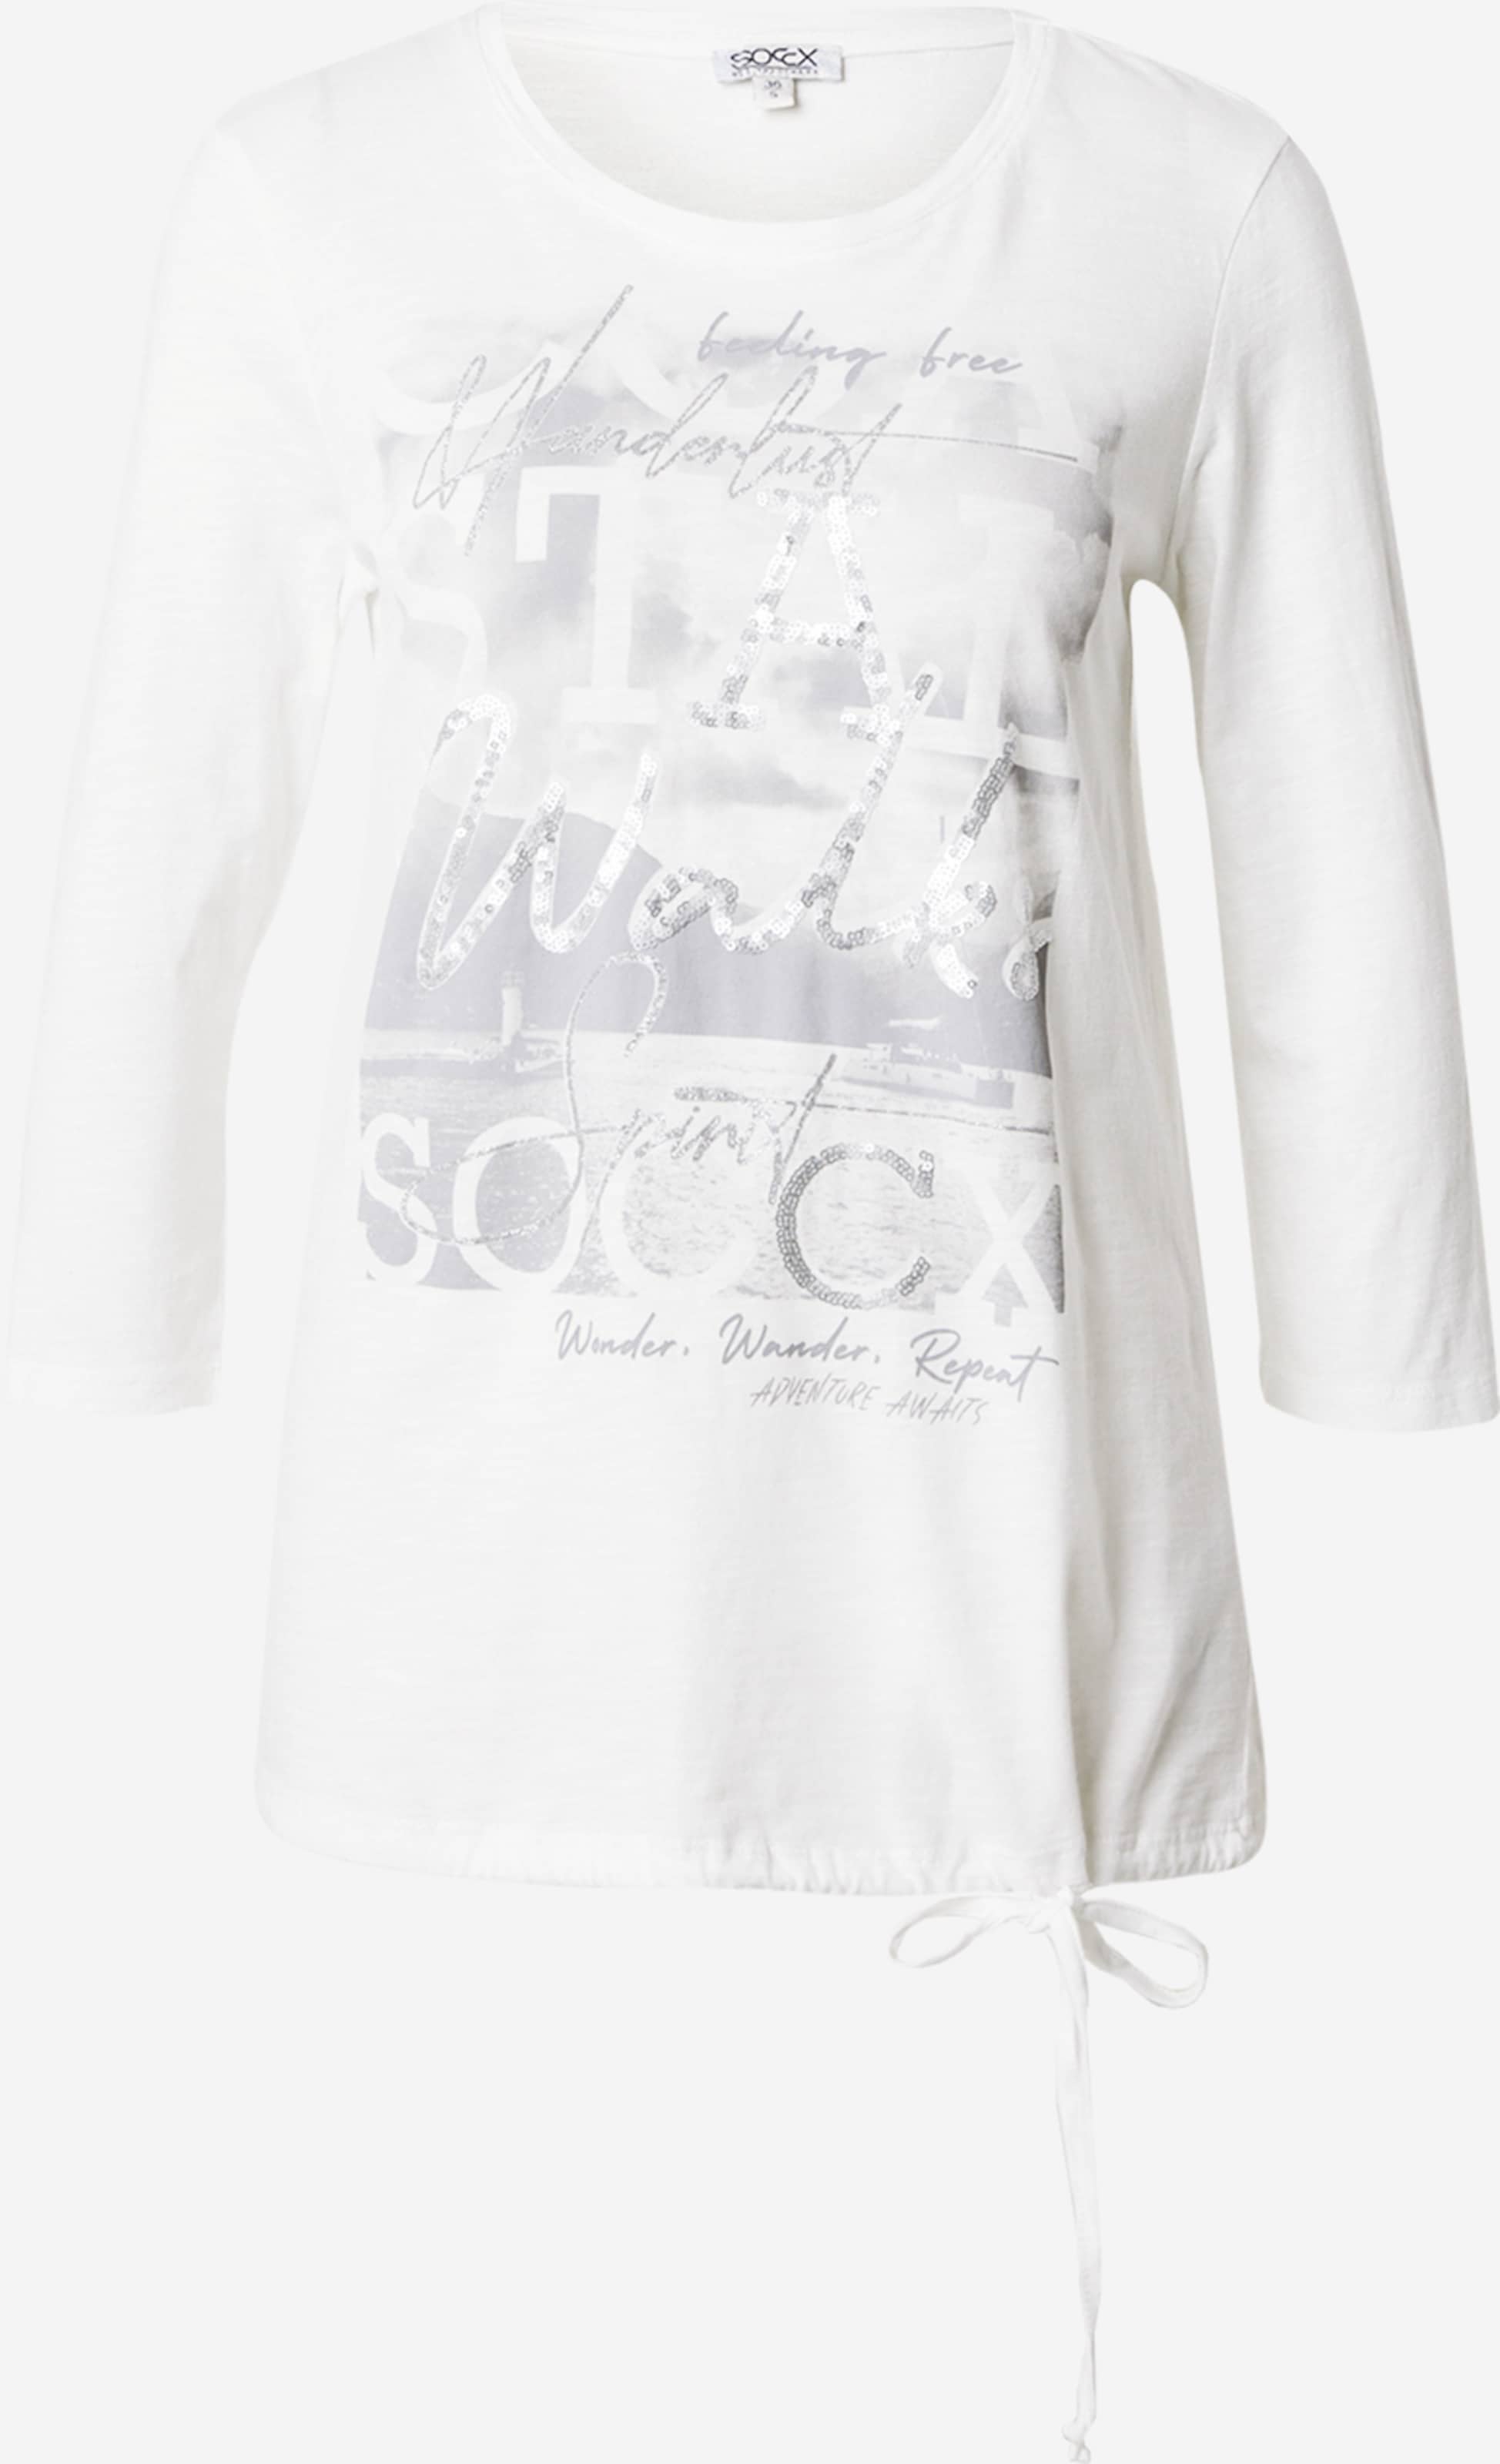 YOU Wollweiß Soccx | in ABOUT Shirt